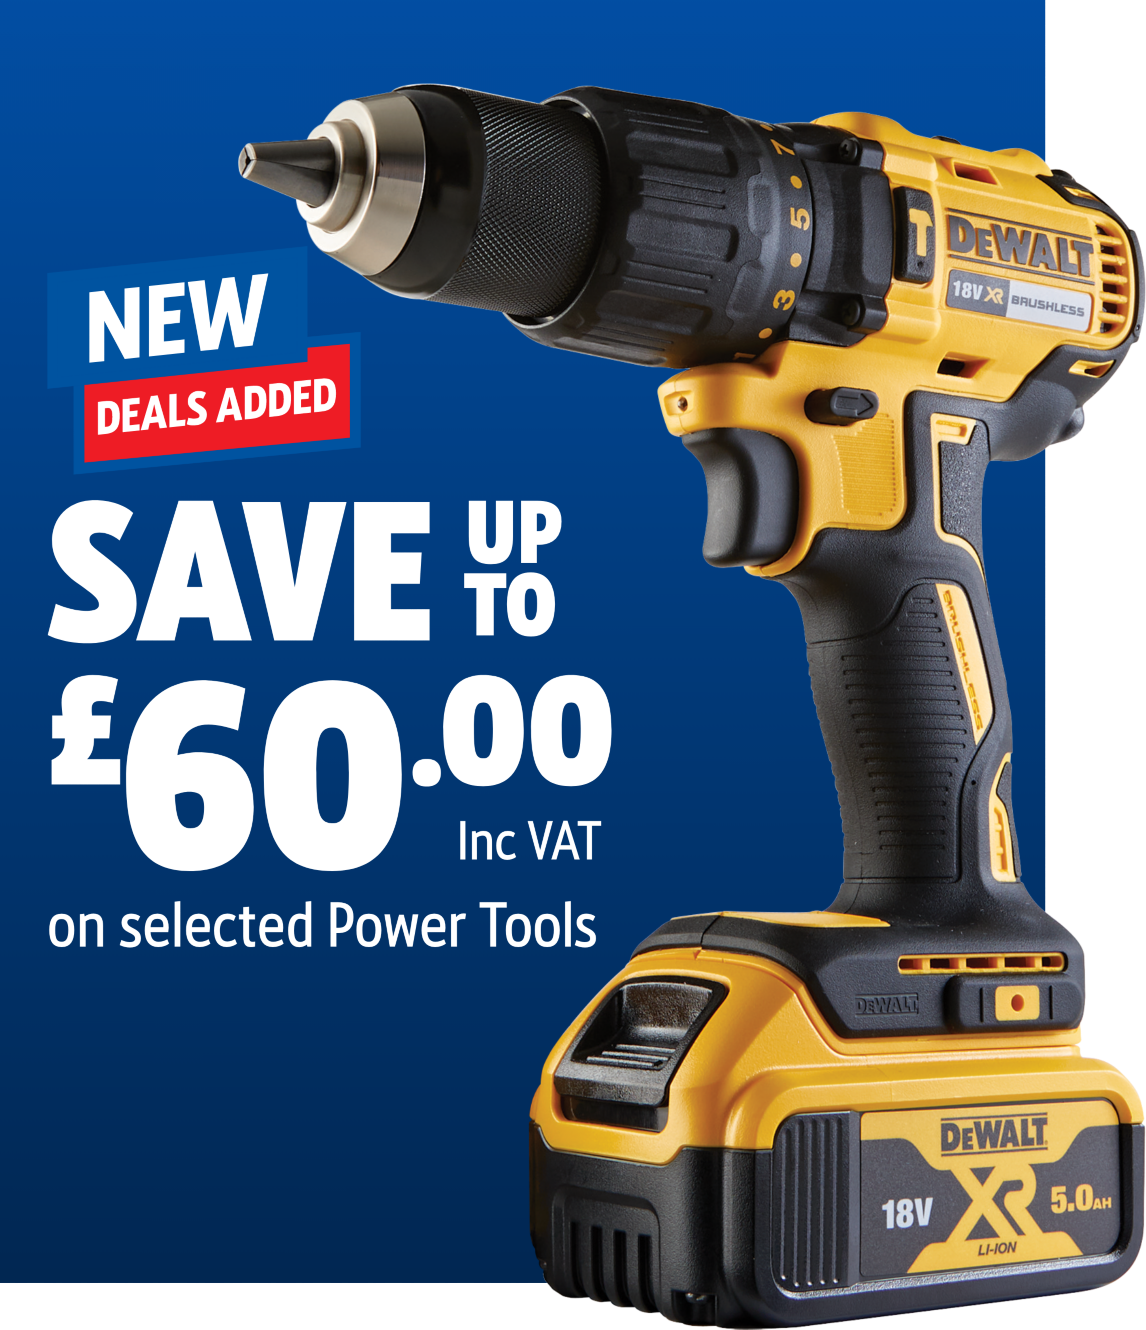 Save up to £60 Inc VAT on selected Power Tools